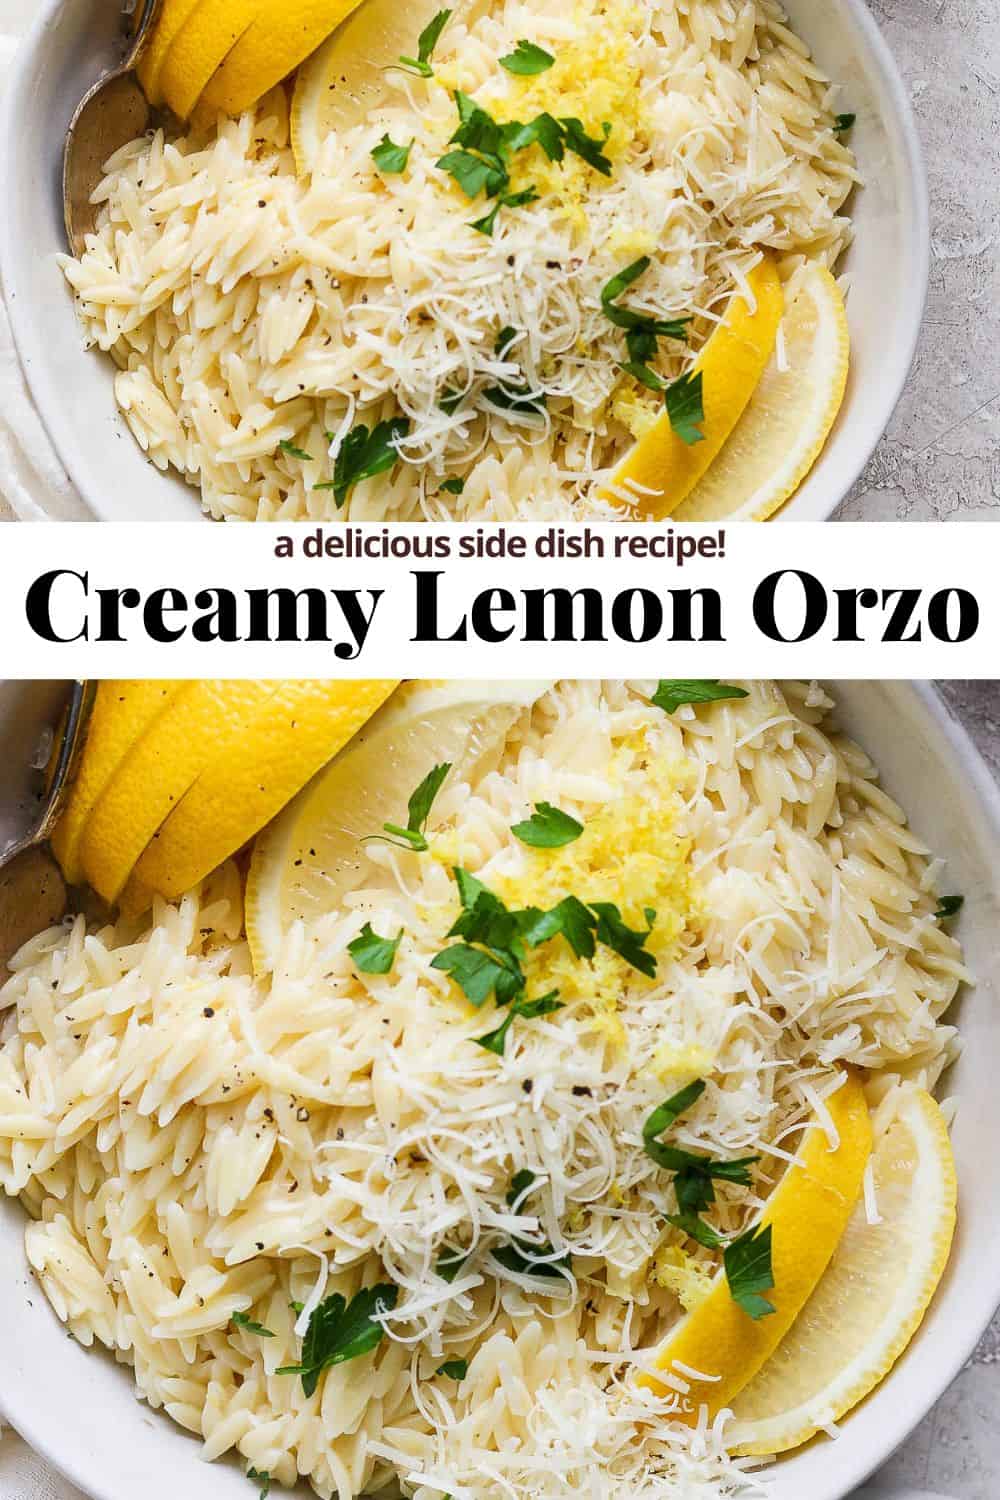 Pinterest image with Lemon orzo in a bowl garnished with lemon wedges, shaved parmesan, lemon zest, and chopped parsley.  The headline reads "creamy lemon orzo a delicious side dish recipe!"